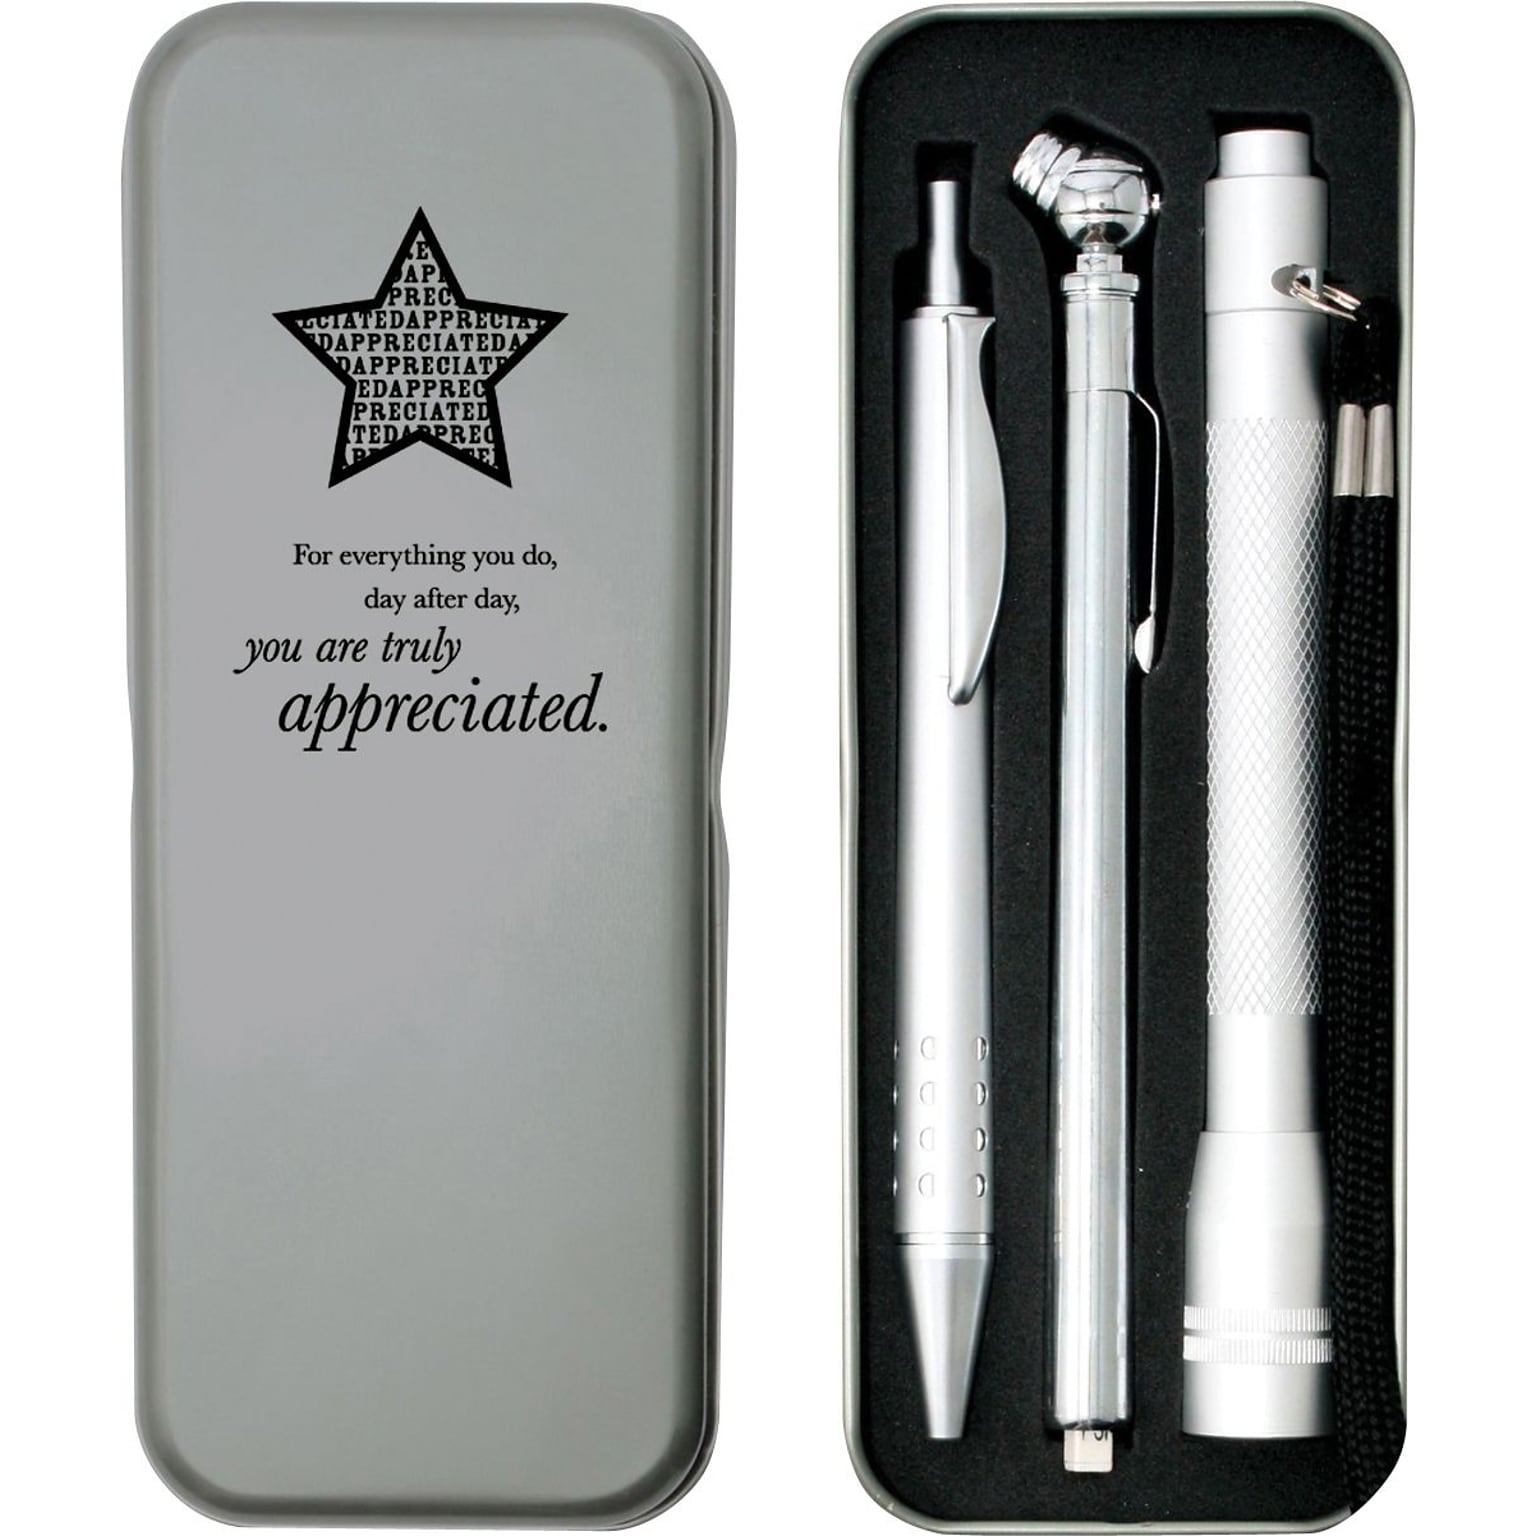 Baudville Silver Tire Gauge, Flashlight and Pen Gift Set, You Are Truly Appreciated, Silver (1391515APP31)